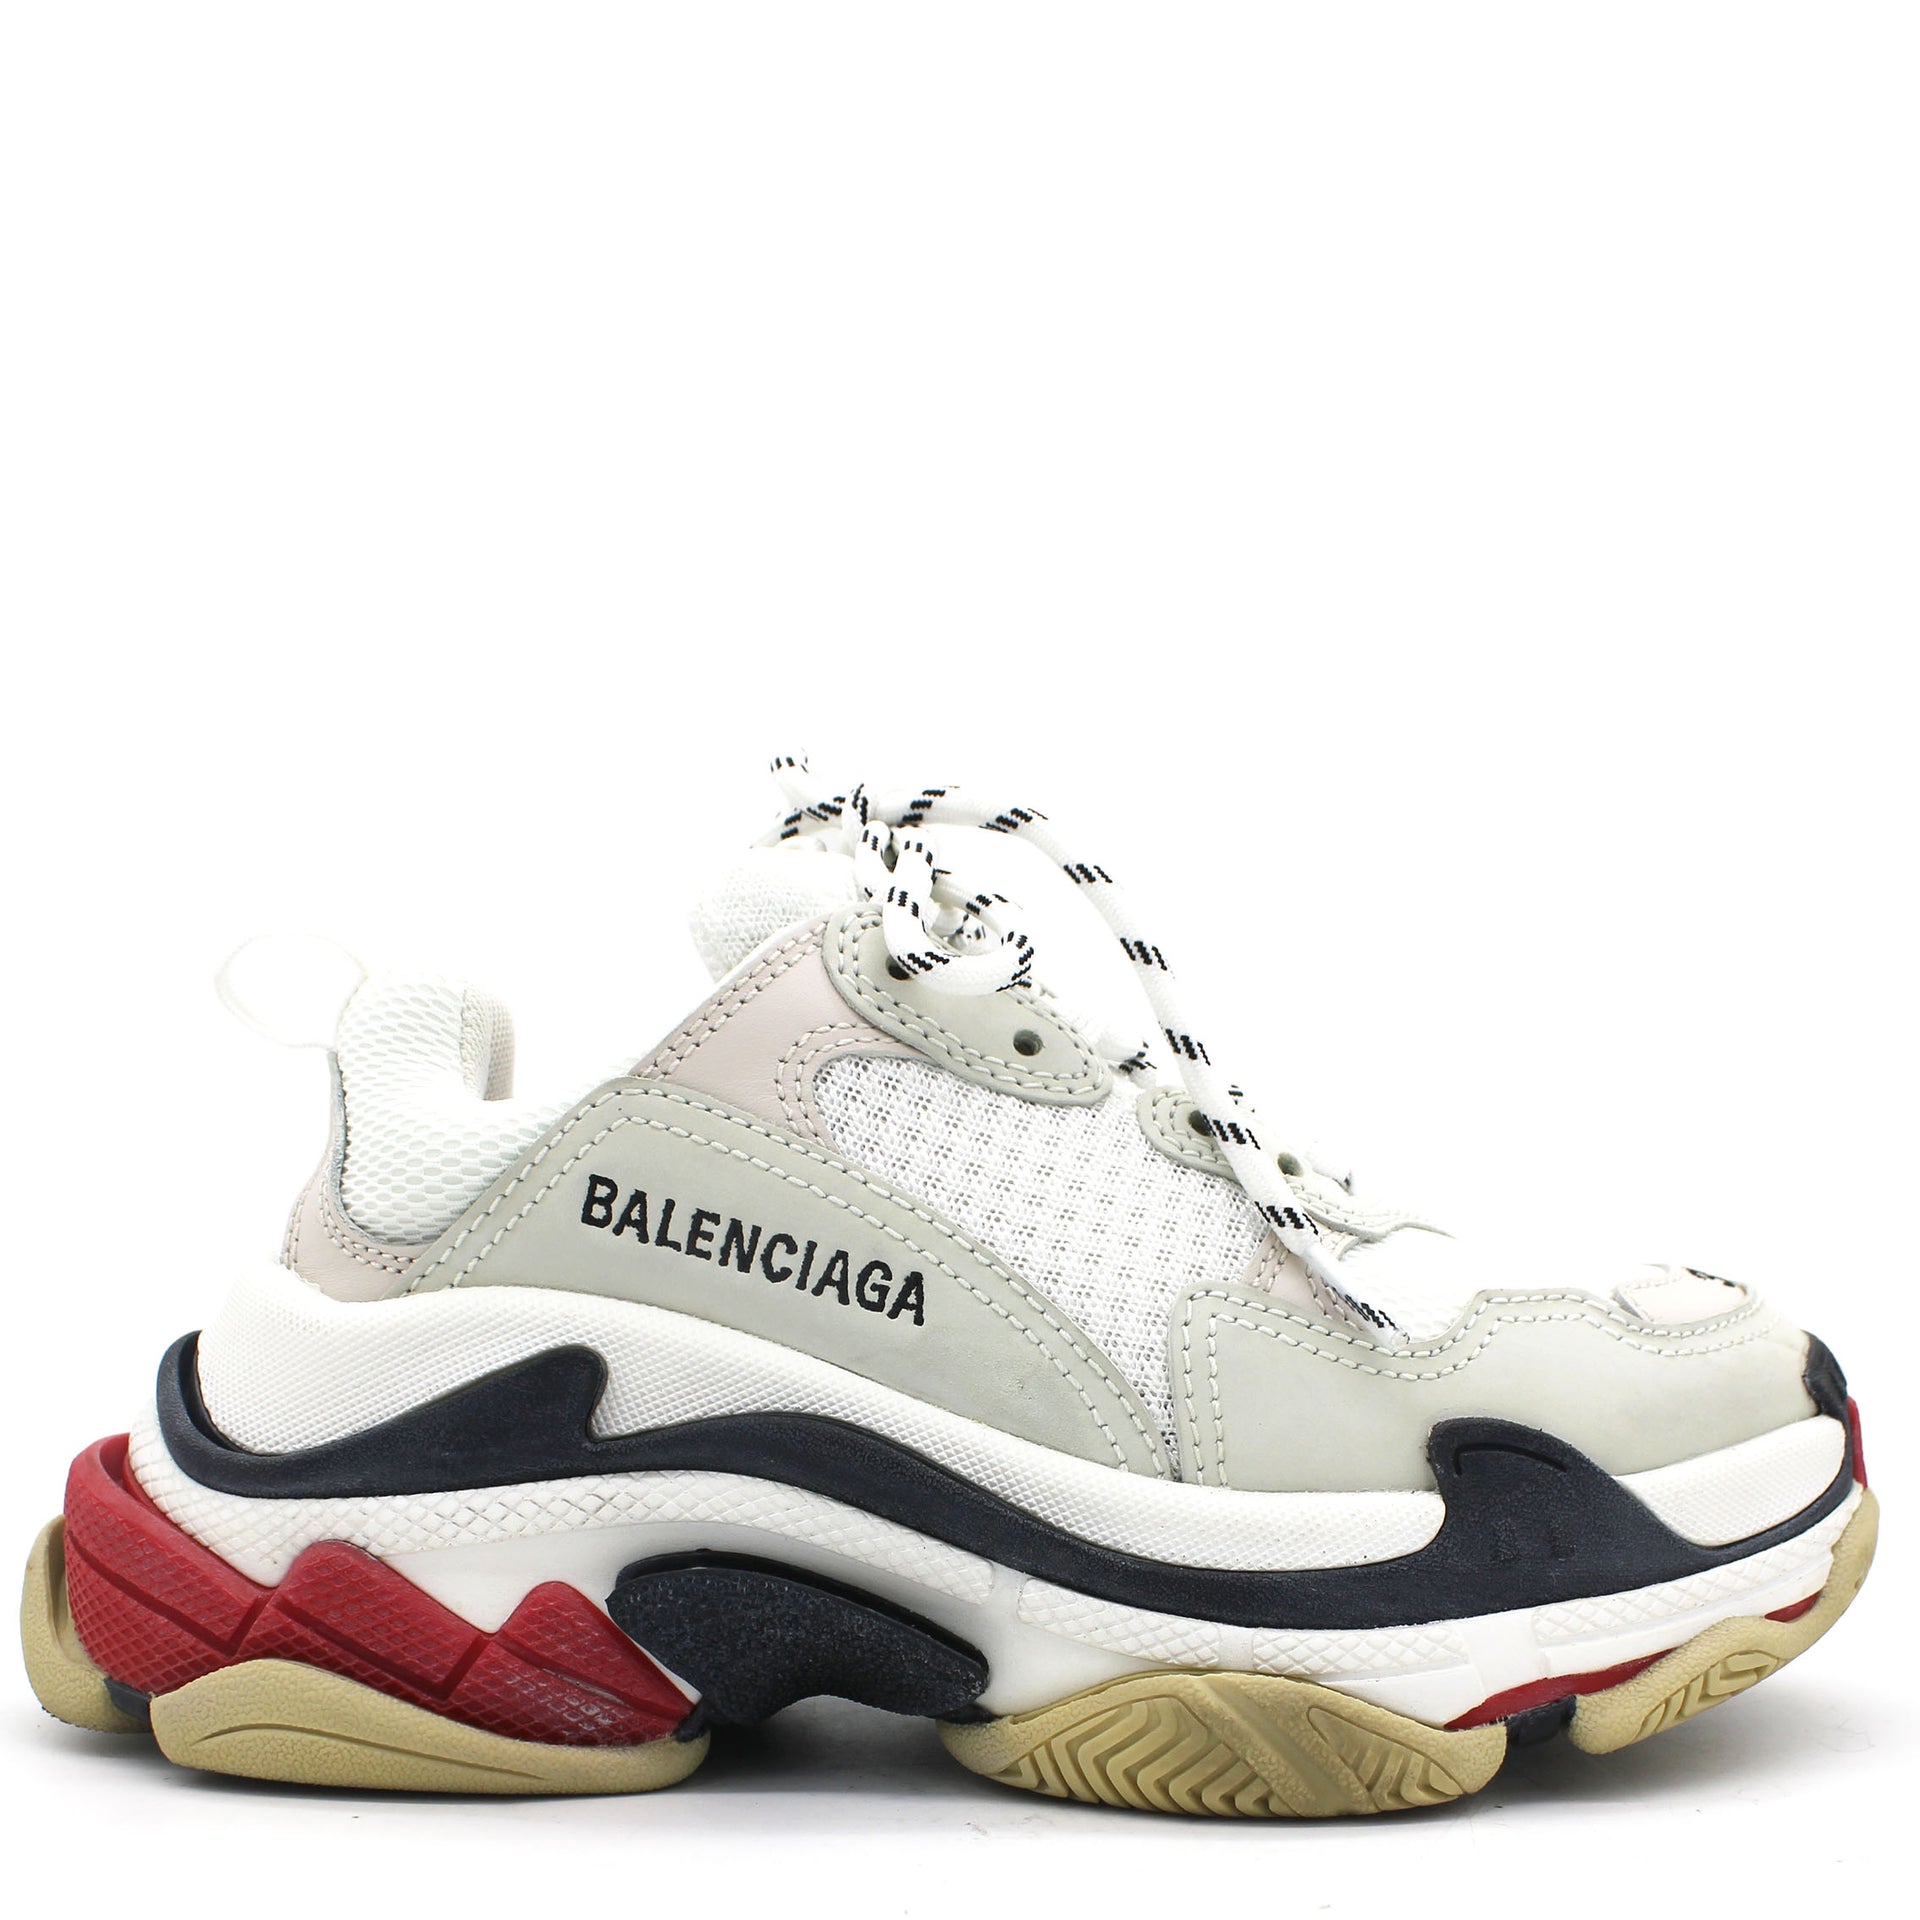 balenciaga Speed Trainers Low Top OG Style Mens Size 40 Black  eBay